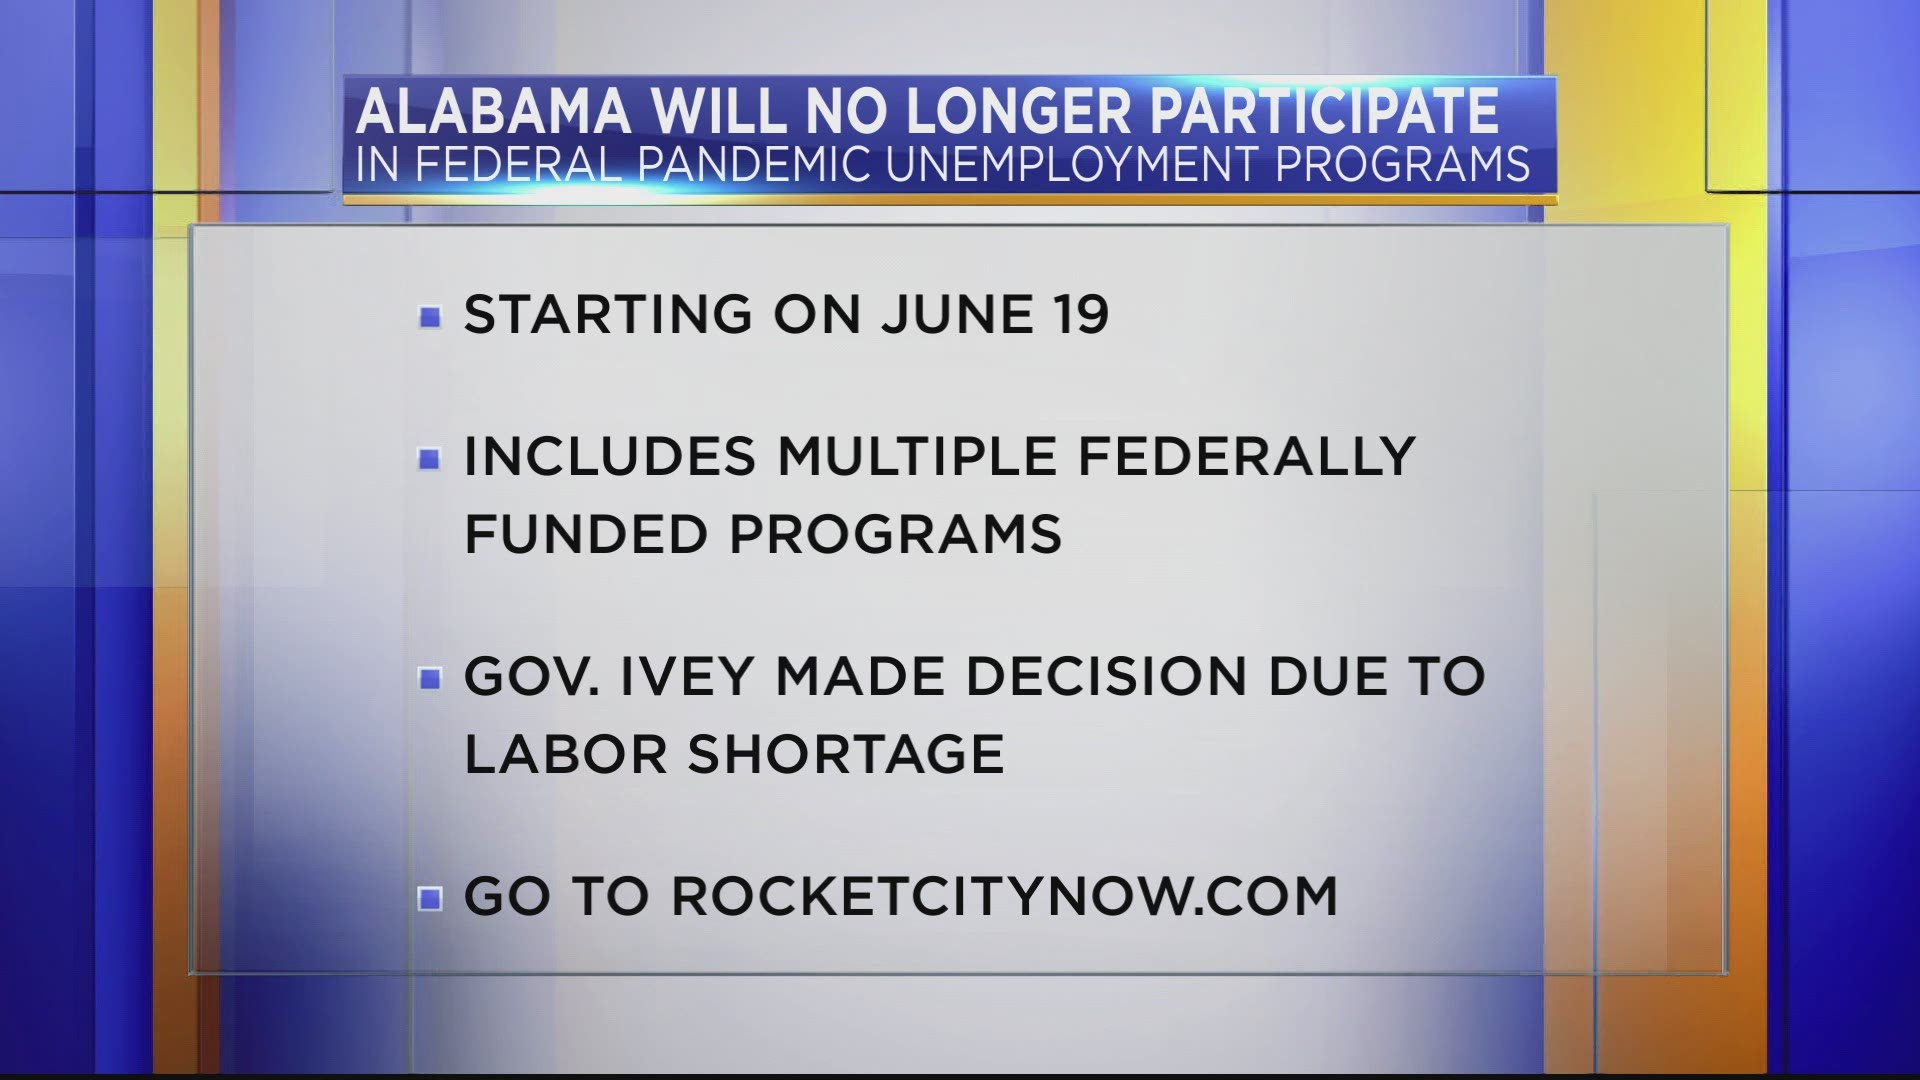 The programs provided additional funds beyond what Alabama offers in its unemployment programs.